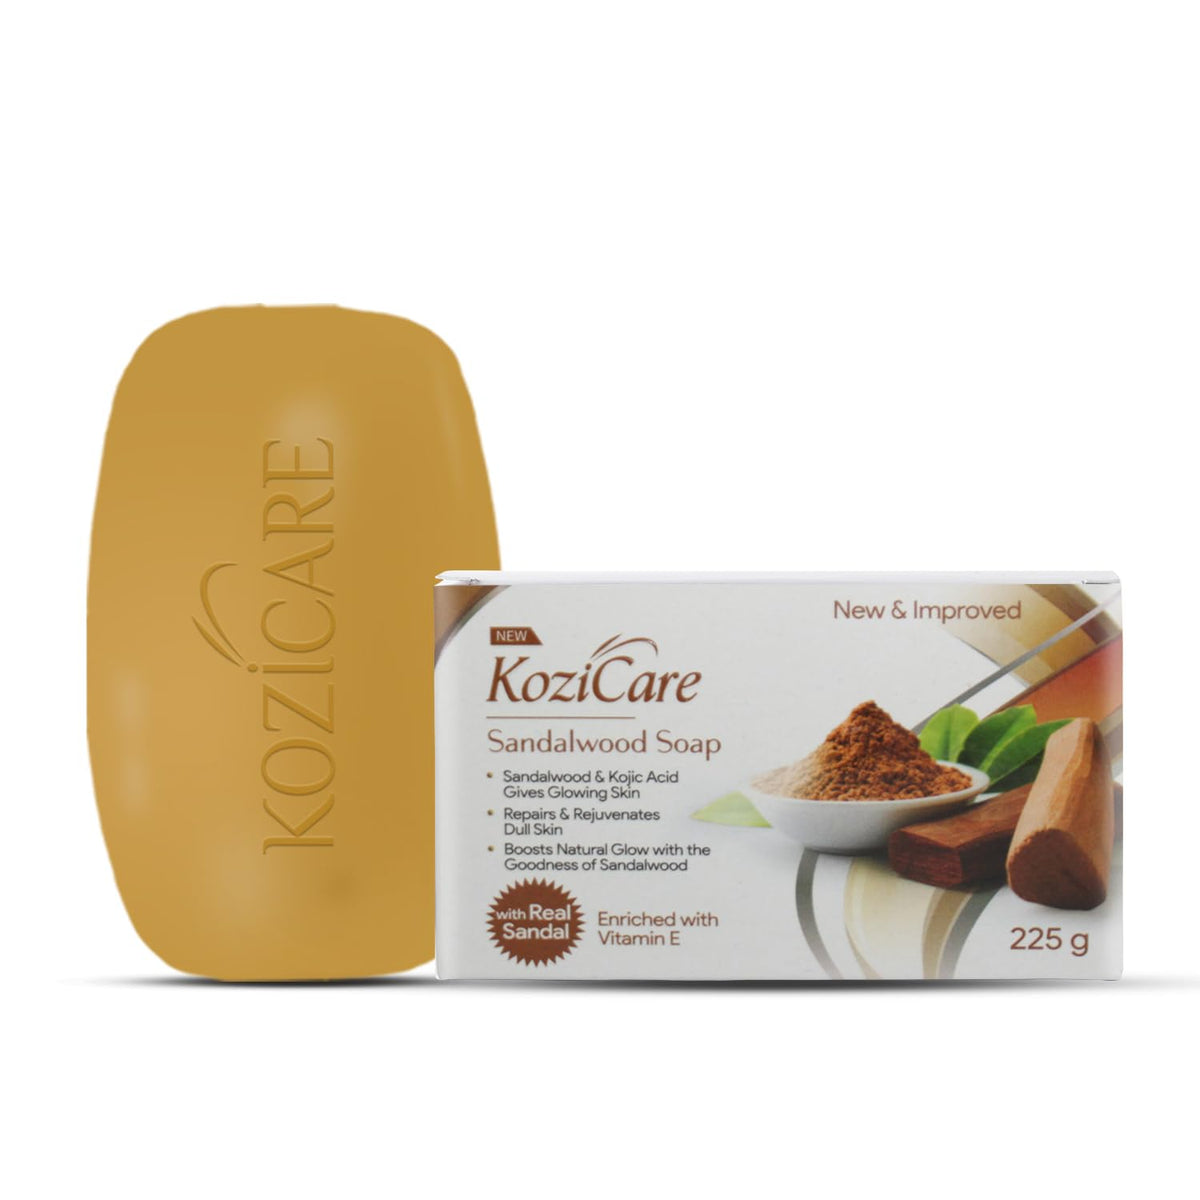 Kozicare Sandal Soap Bars | Kojic Acid Soap | Soap for Men & Women | Bathing Soaps for Natural Glowing Skin | Repairs Dull Skin | Hydrates & Leaves Softness | Bath Soap Combo Offers - Pack of 3